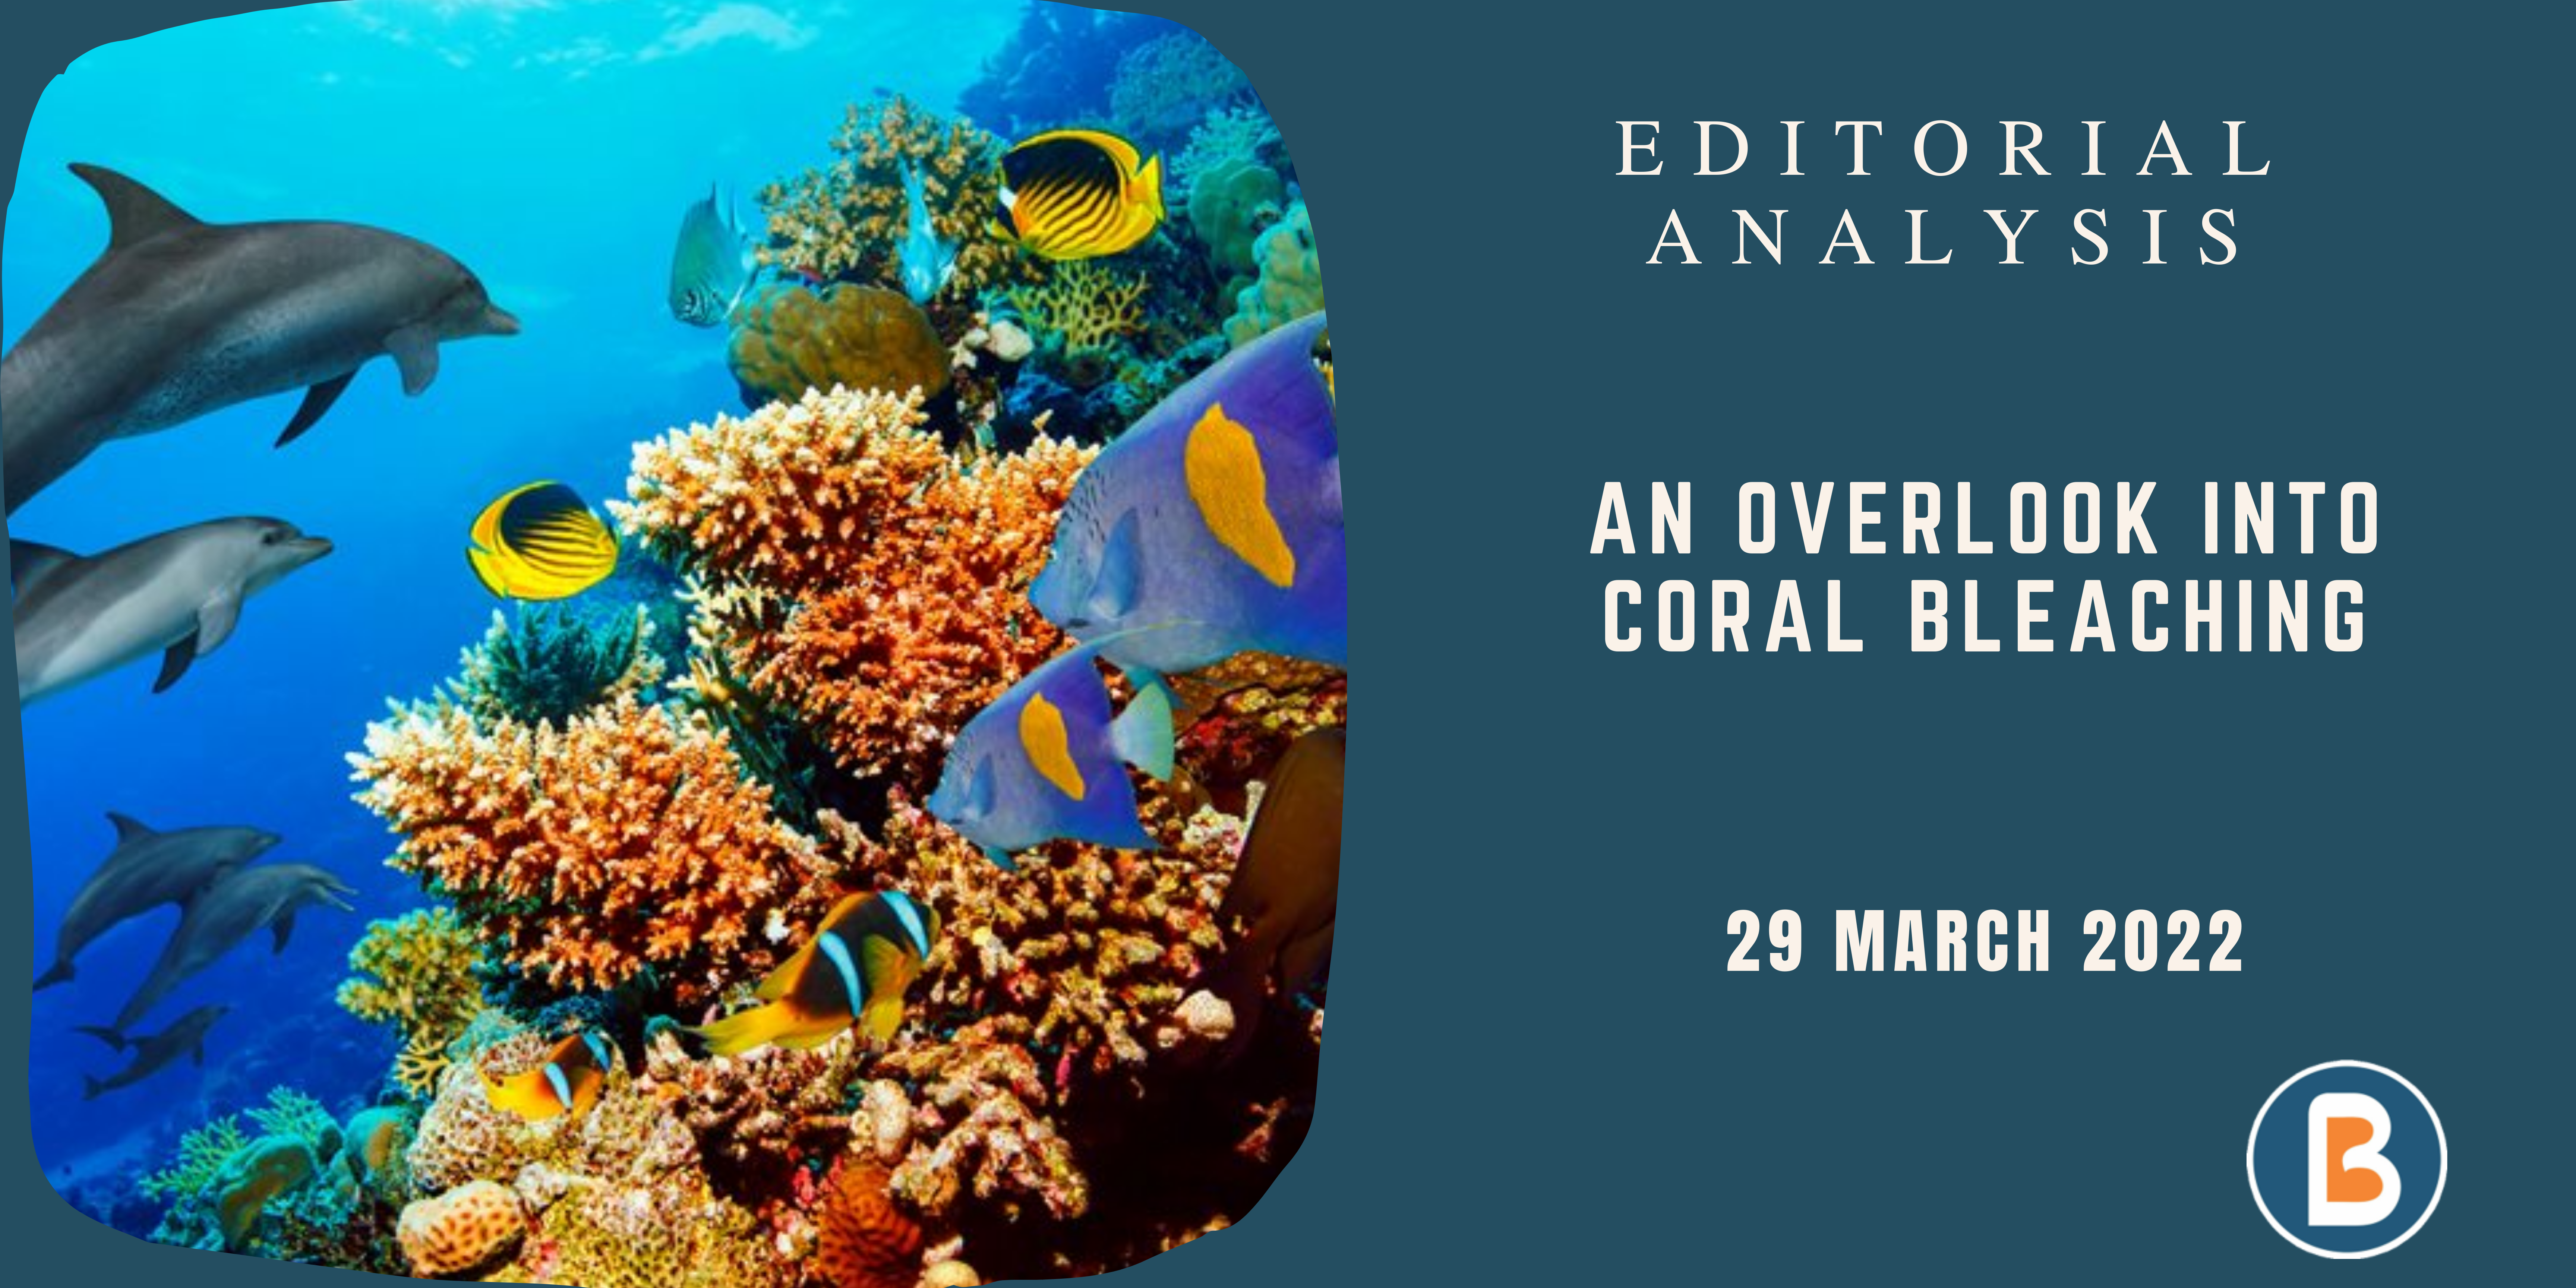 Editorial Analysis for IAS - Coral Bleaching: A Complete Overview